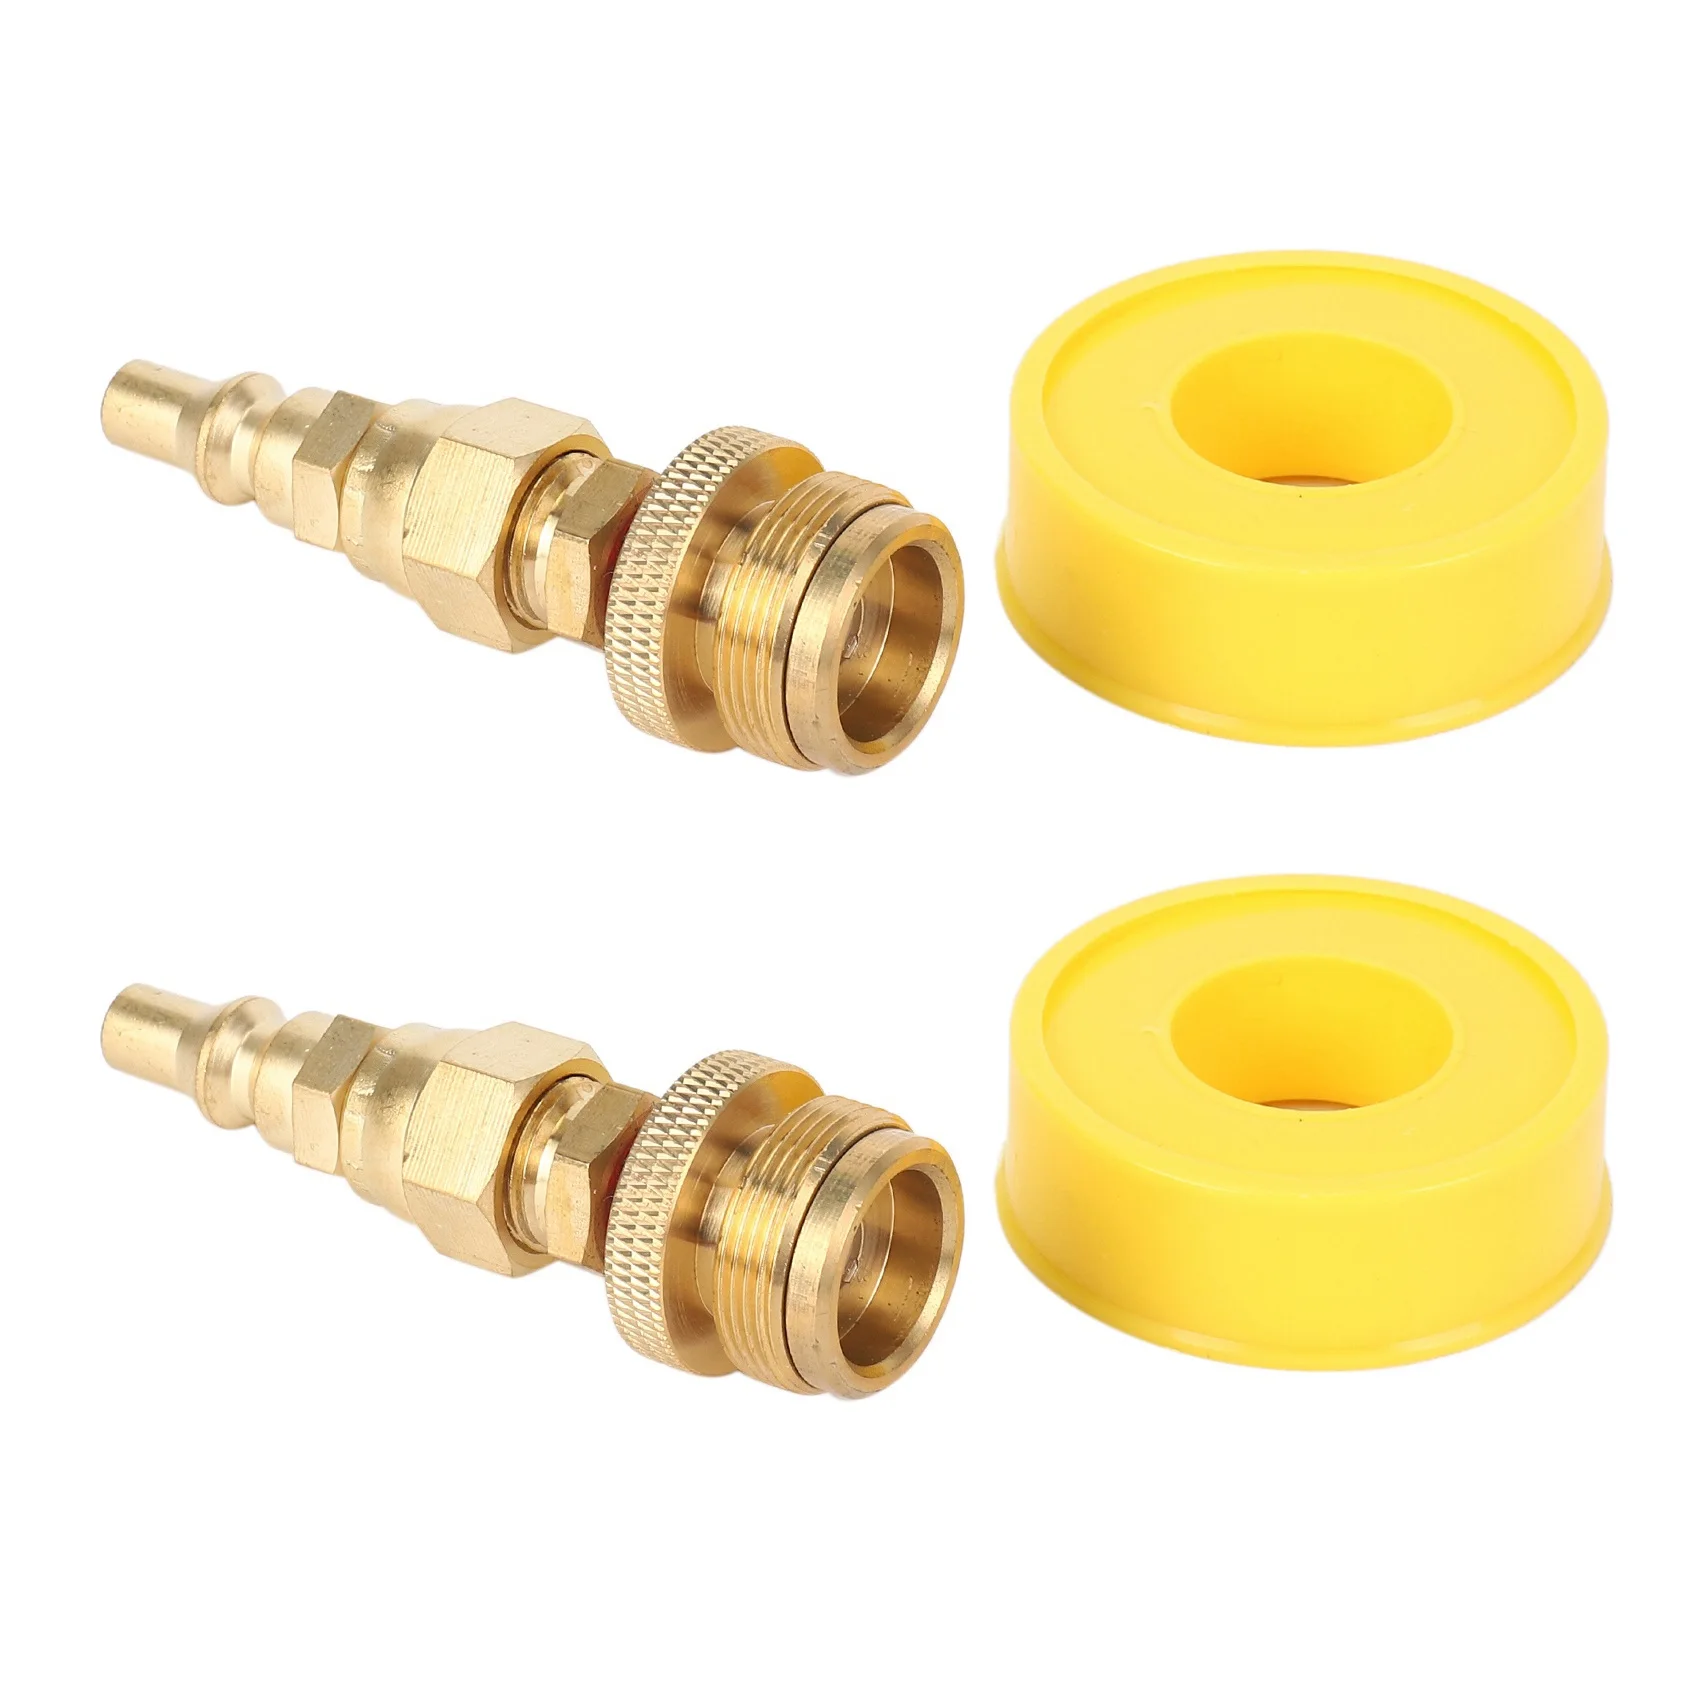 

2X 1LB Propane Regulator Adapter 1in -20 Male Throwaway Cylinder to 3/8in Male Flare & 1/4in Quick Connect Plug Fitting